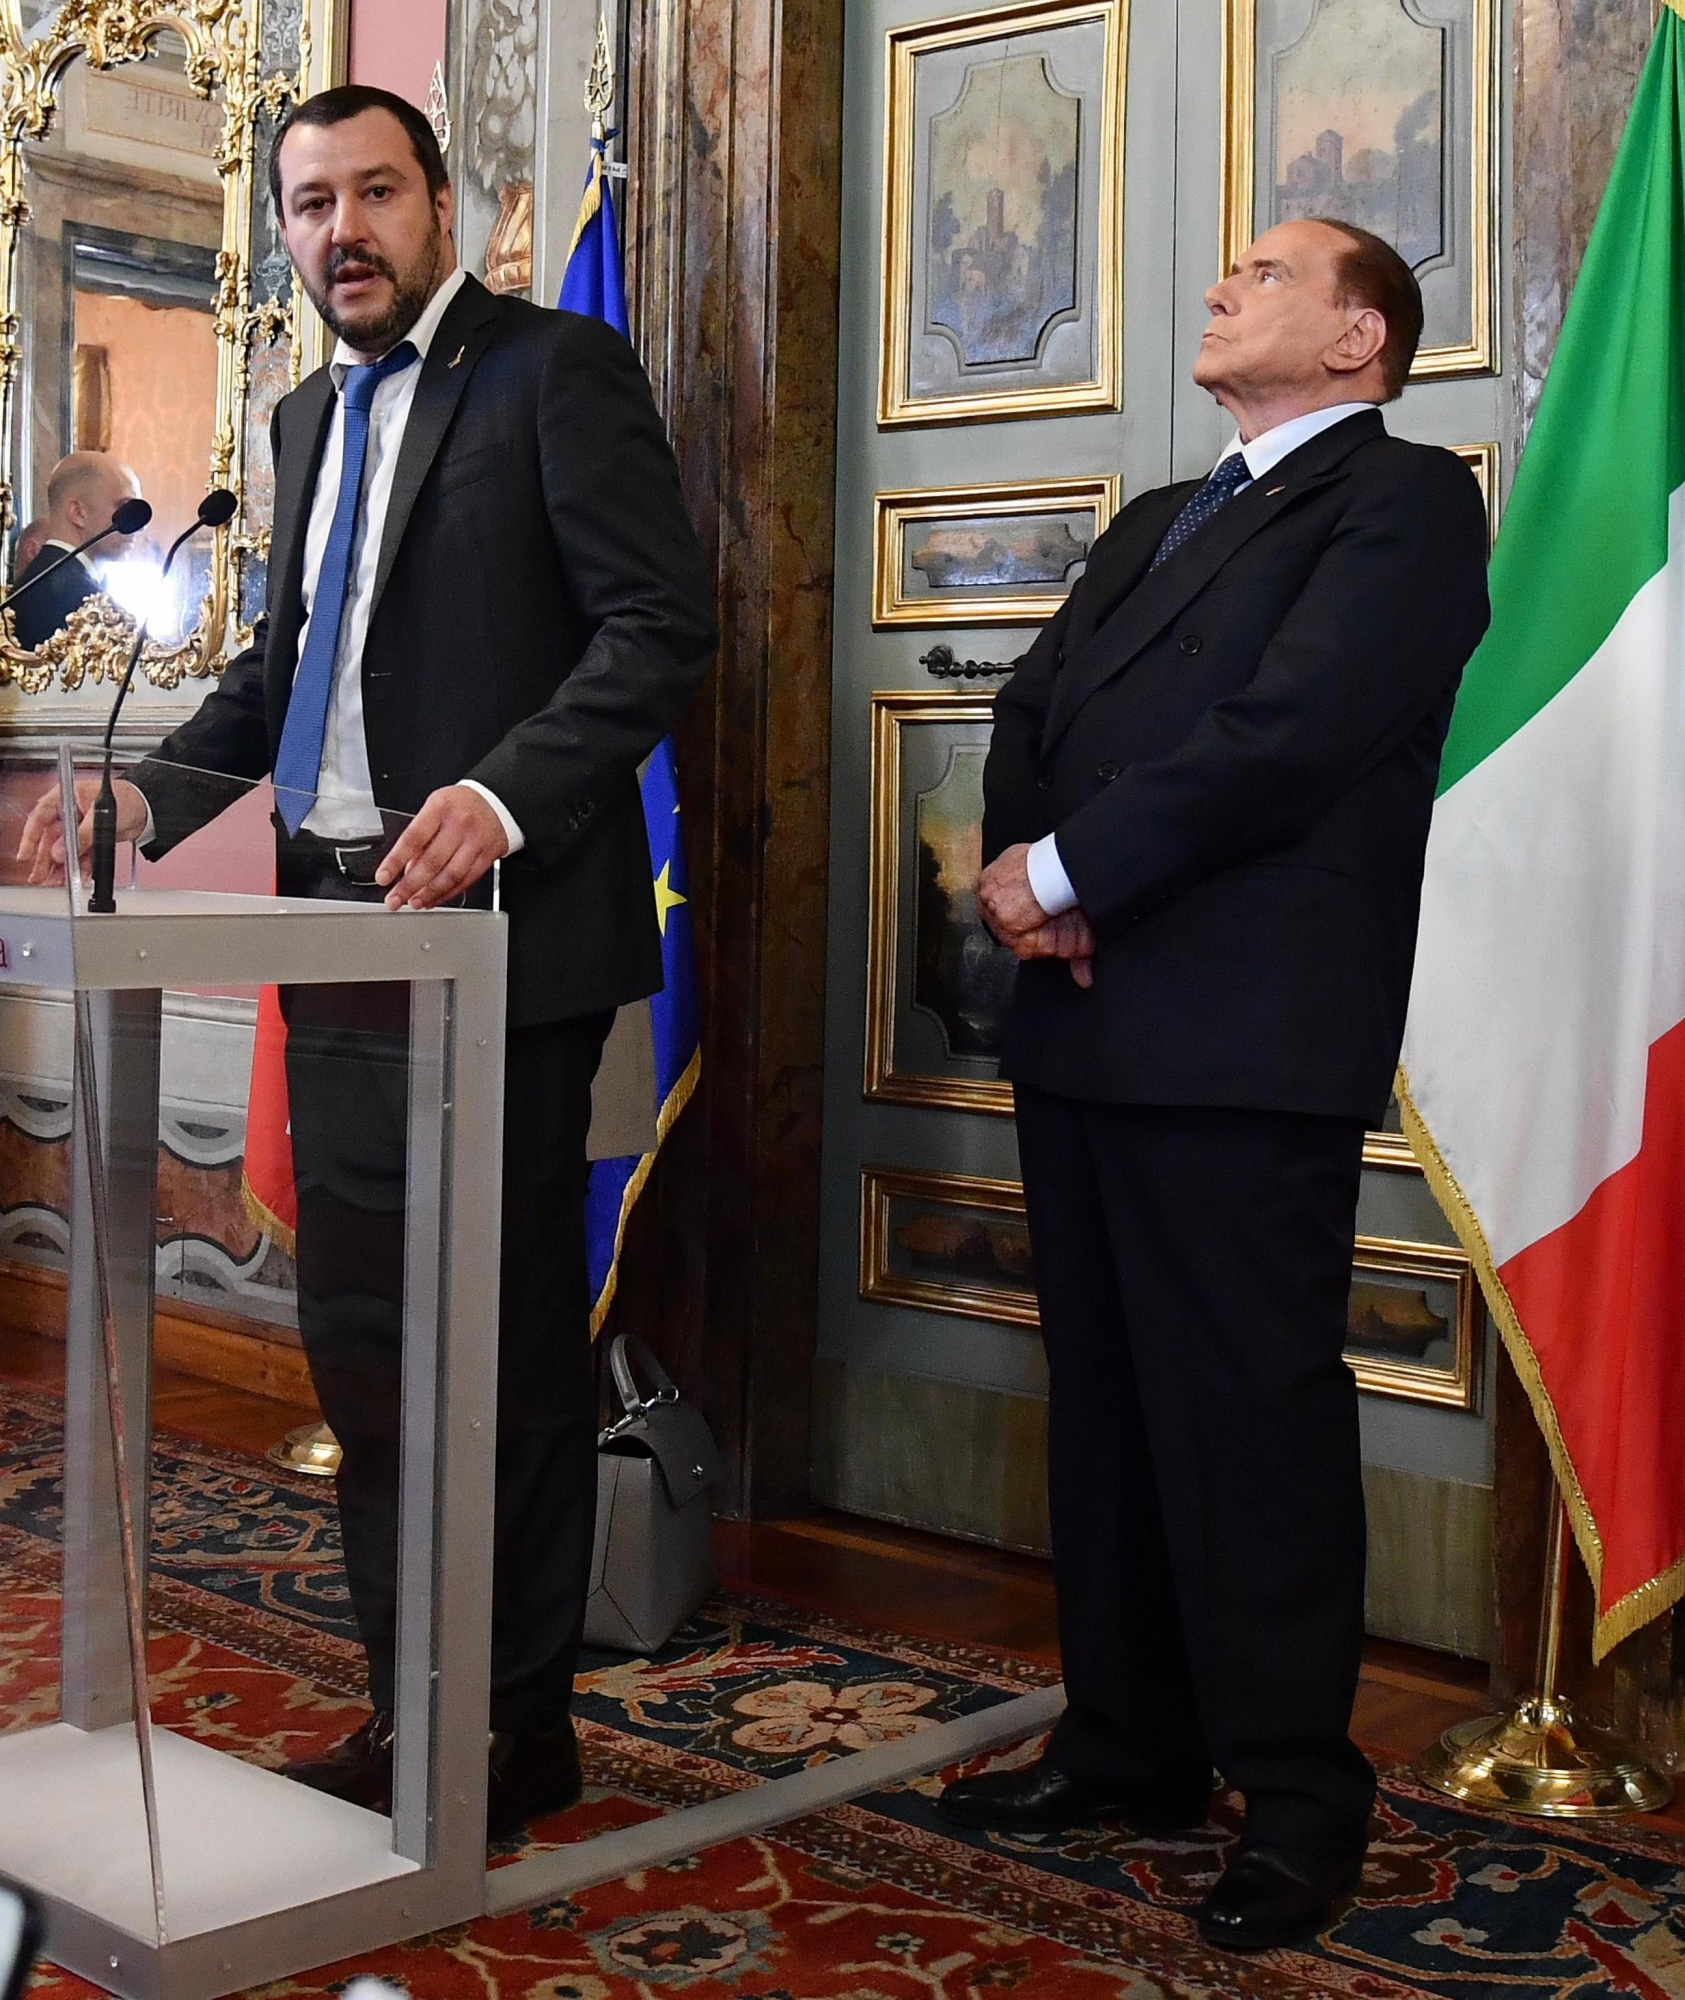 Leader of The League party, Matteo Salvini, left, is flanked by Forza Italia party's leader Silvio Berlusconi as they address the media after meeting Senate president Maria Elisabetta Alberti Casellati in Rome, Thursday, April 19, 2018. Italy's president on Wednesday tapped the Senate president, a longtime supporter of ex-Premier Silvio Berlusconi, to explore possible alliances to create a governing majority in Parliament, more than a month after Italy's inconclusive elections. (Ettore Ferrari/ANSA via AP) Italy Politics